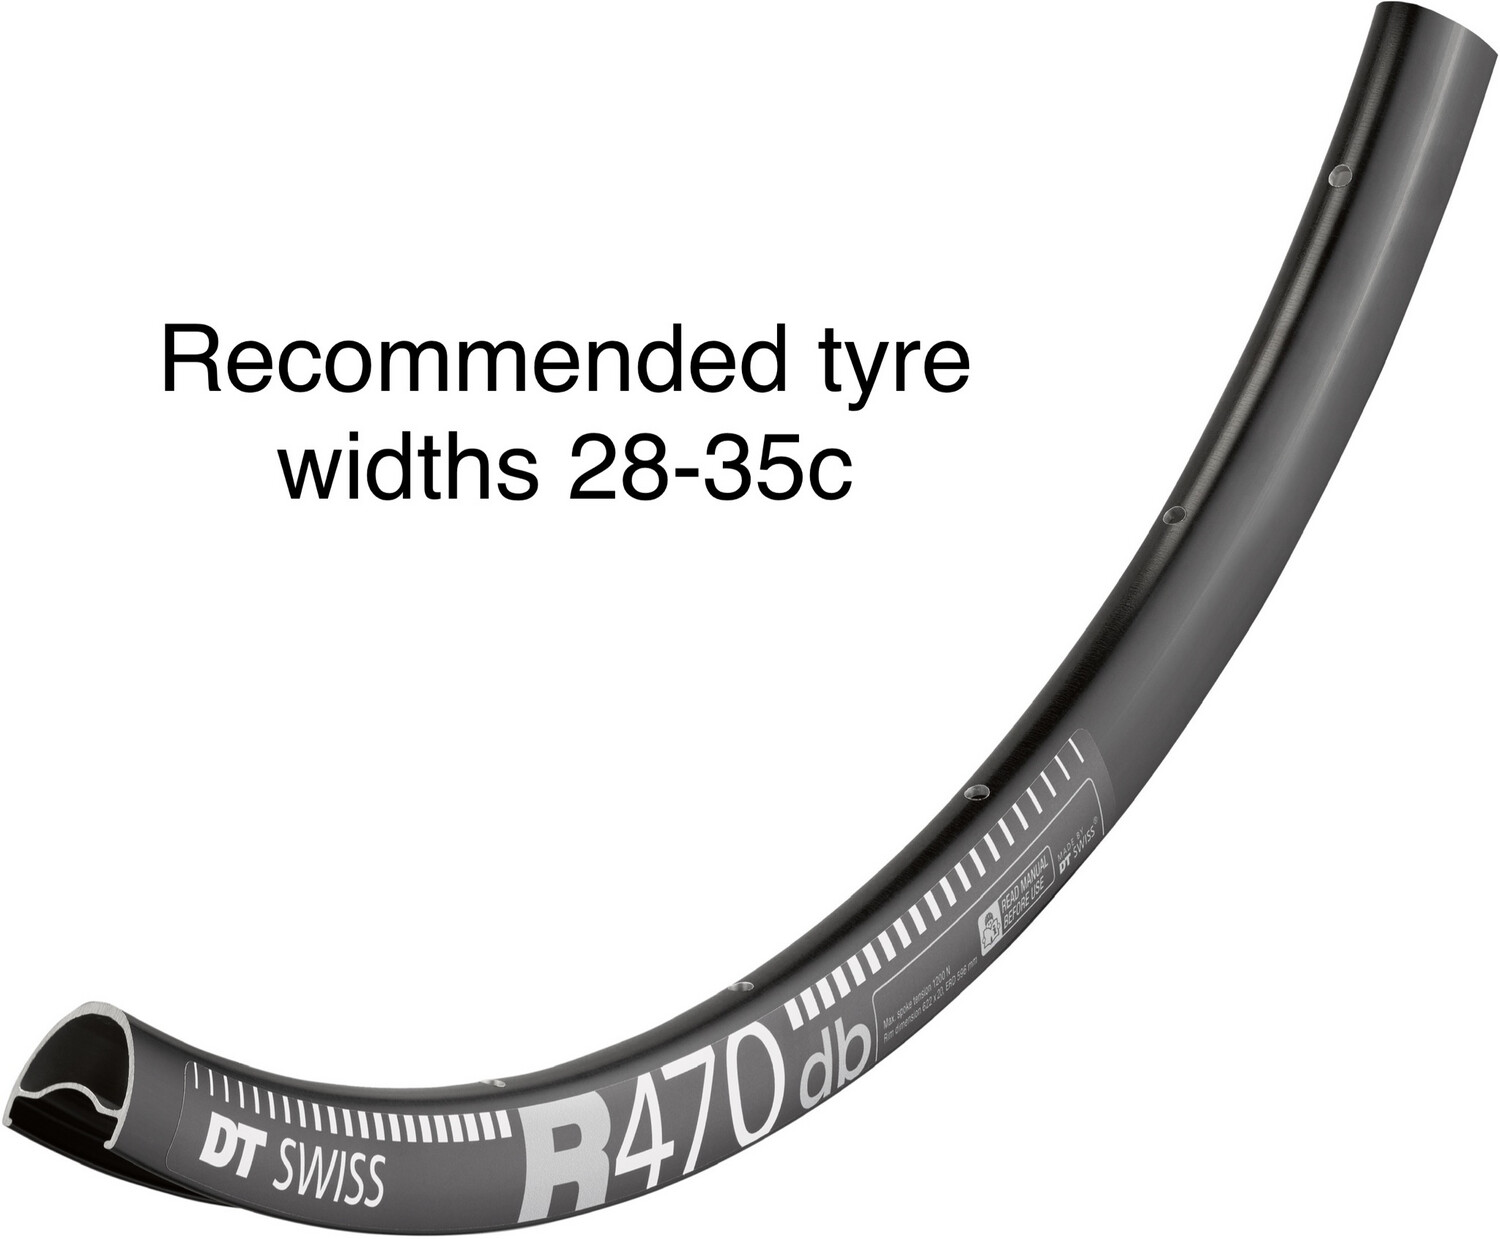 DT Swiss R470 700c rim with DT Swiss 350 hubs. For disc brake and 12mm  thru-axle or Quick release